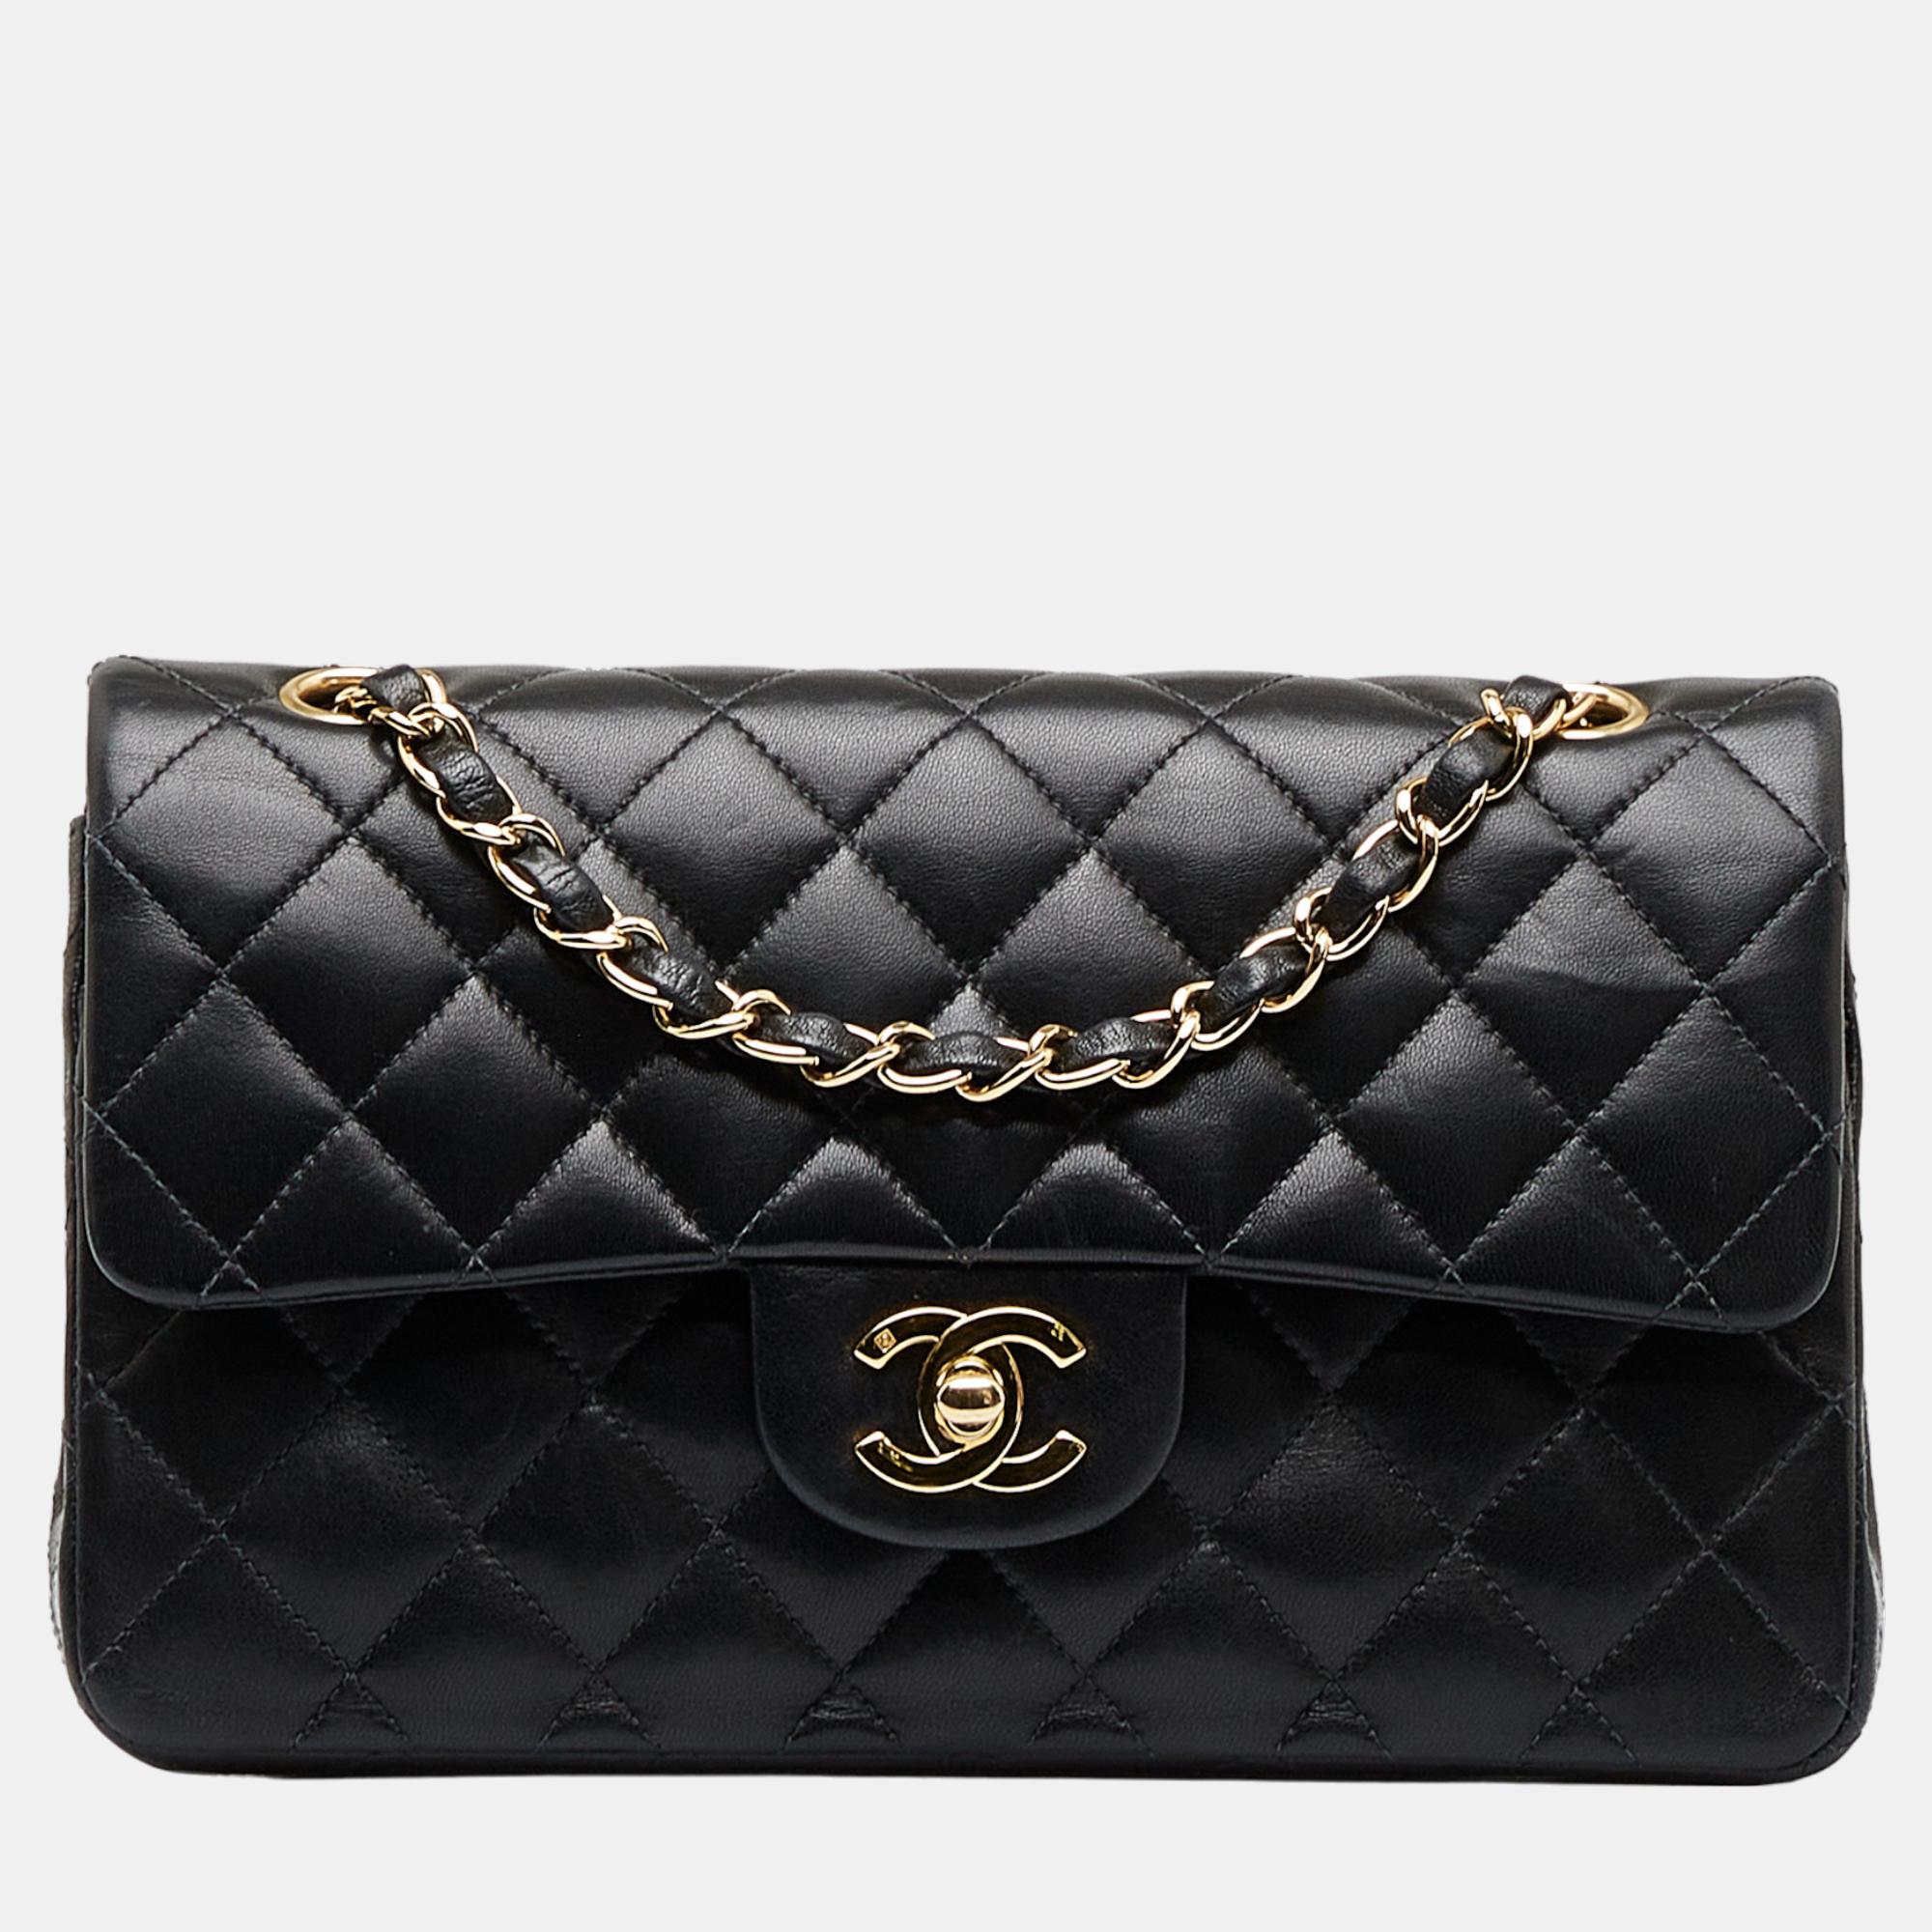 Chanel Black Small Classic Lambskin Leather Double Flap Bag